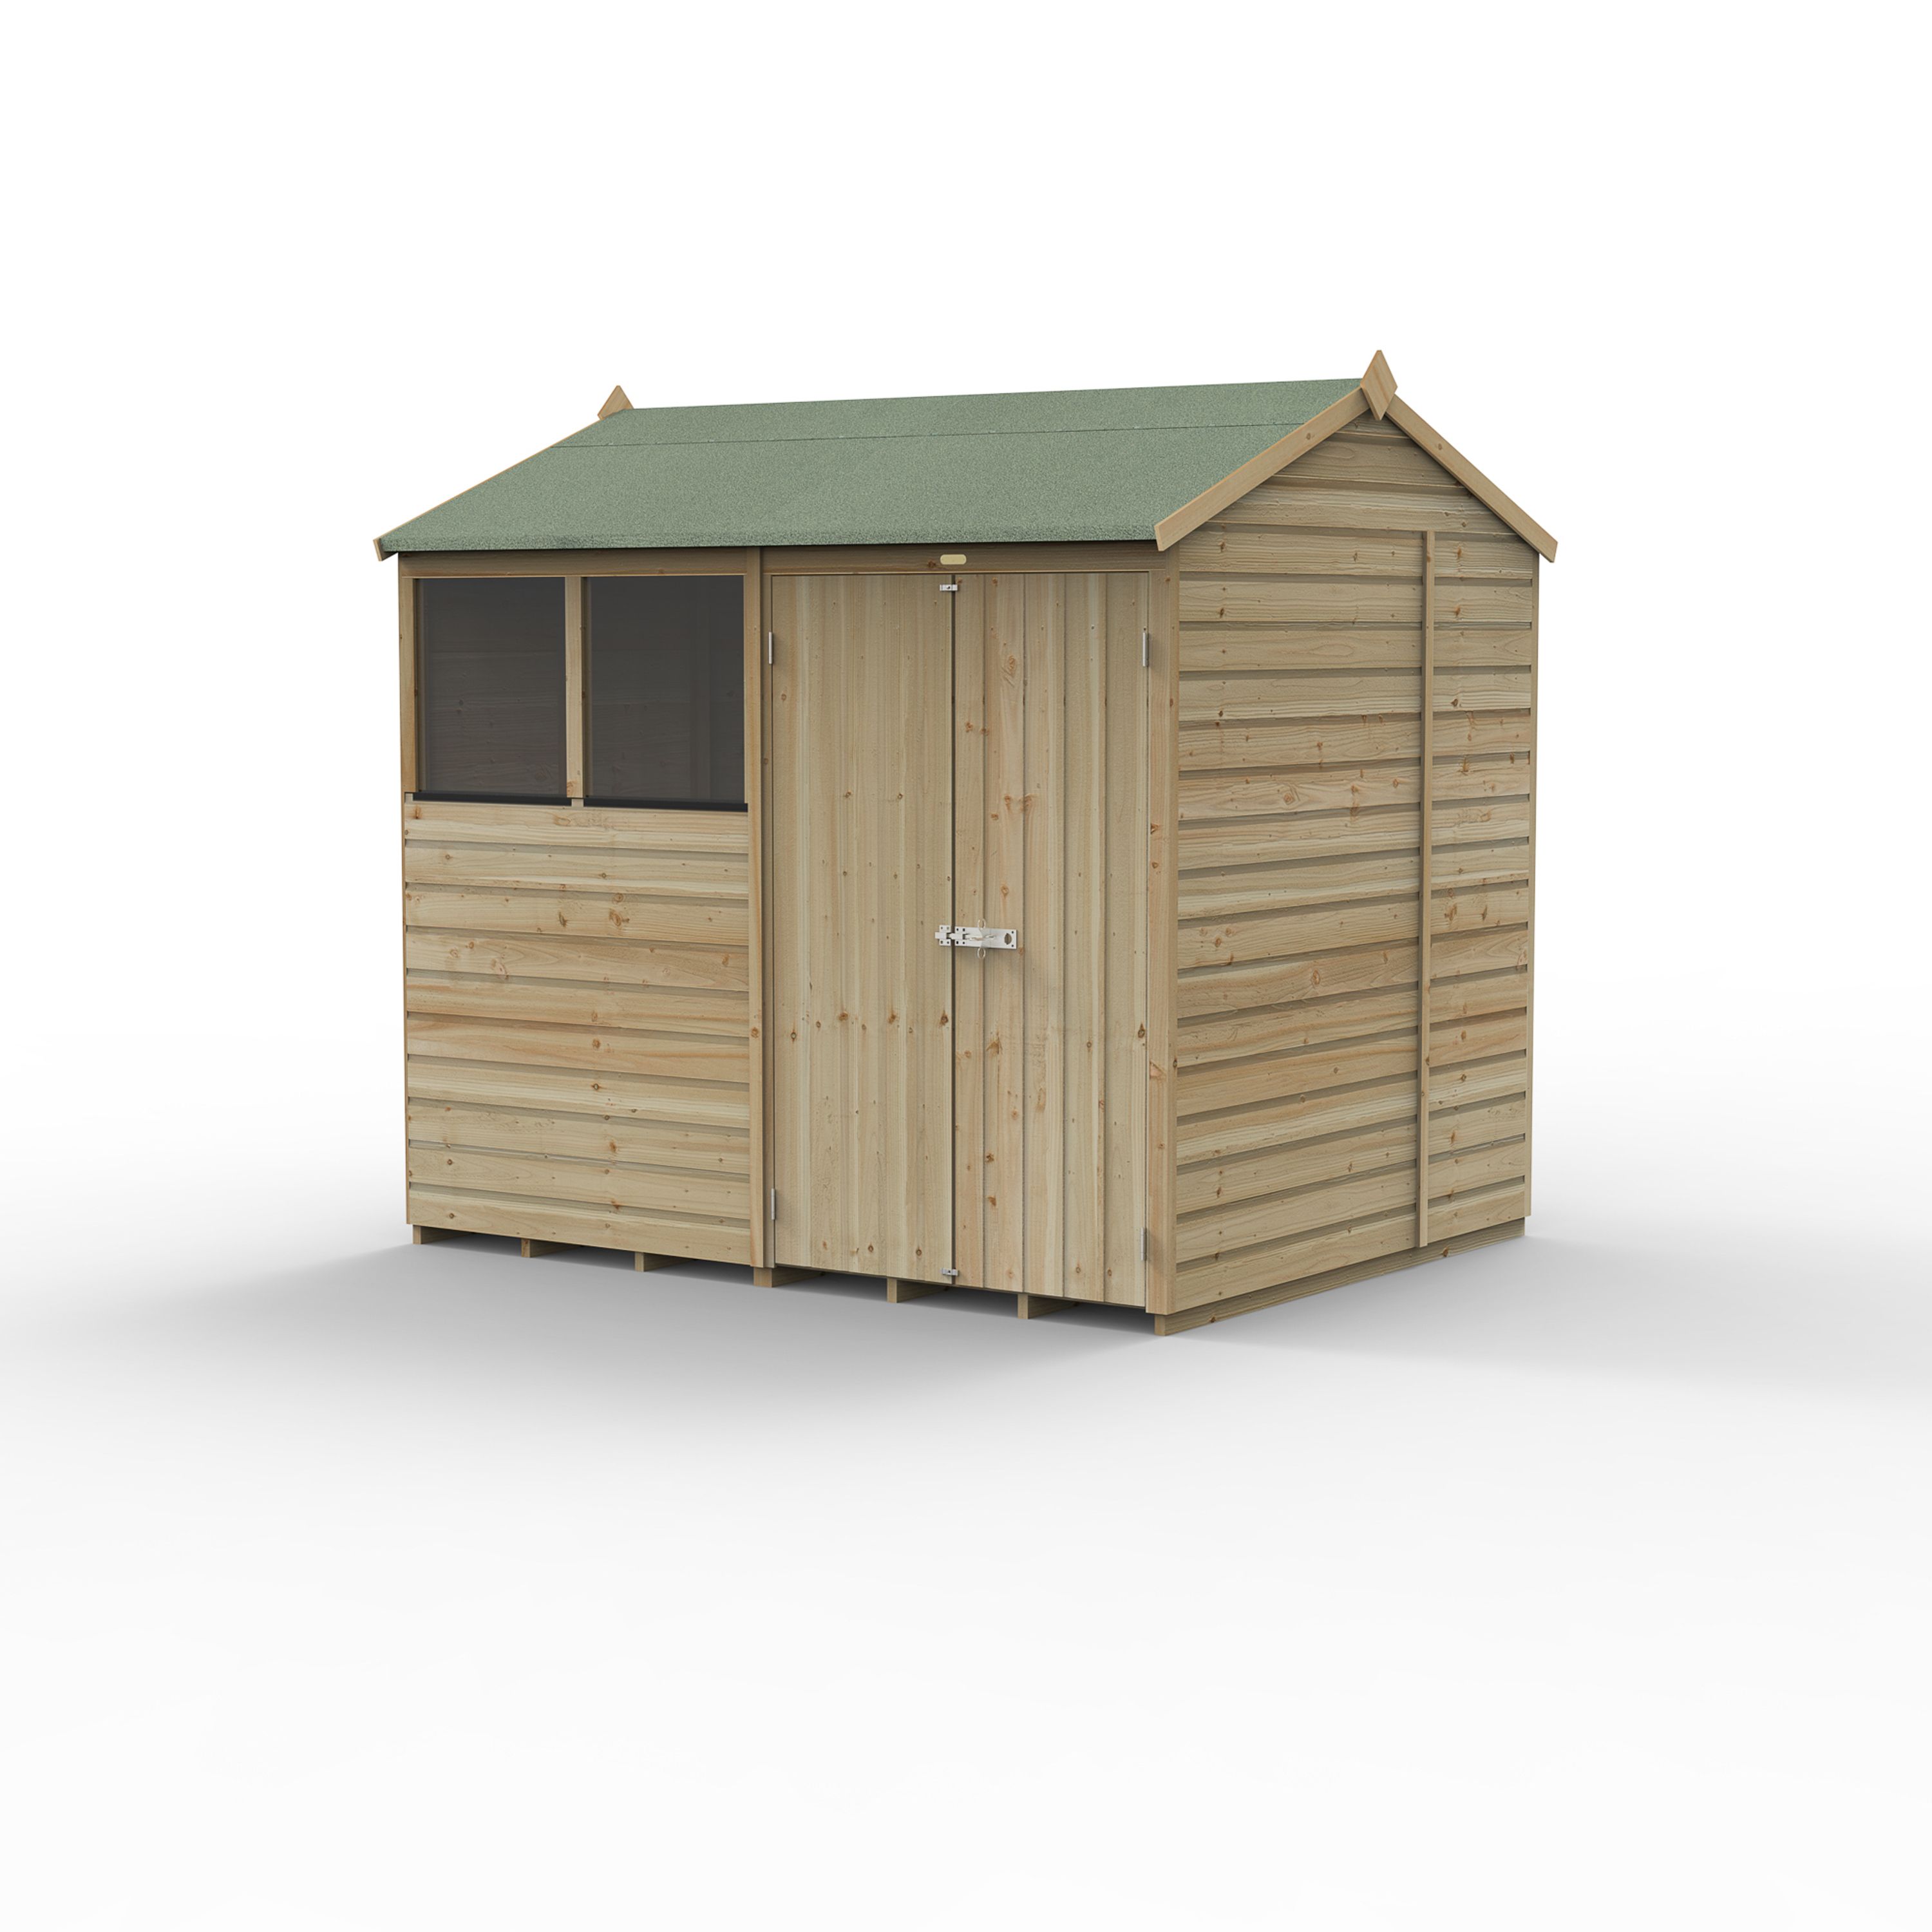 Forest Garden Beckwood 8x6 ft Reverse apex Natural timber Wooden 2 door Shed with floor & 2 windows (Base included)